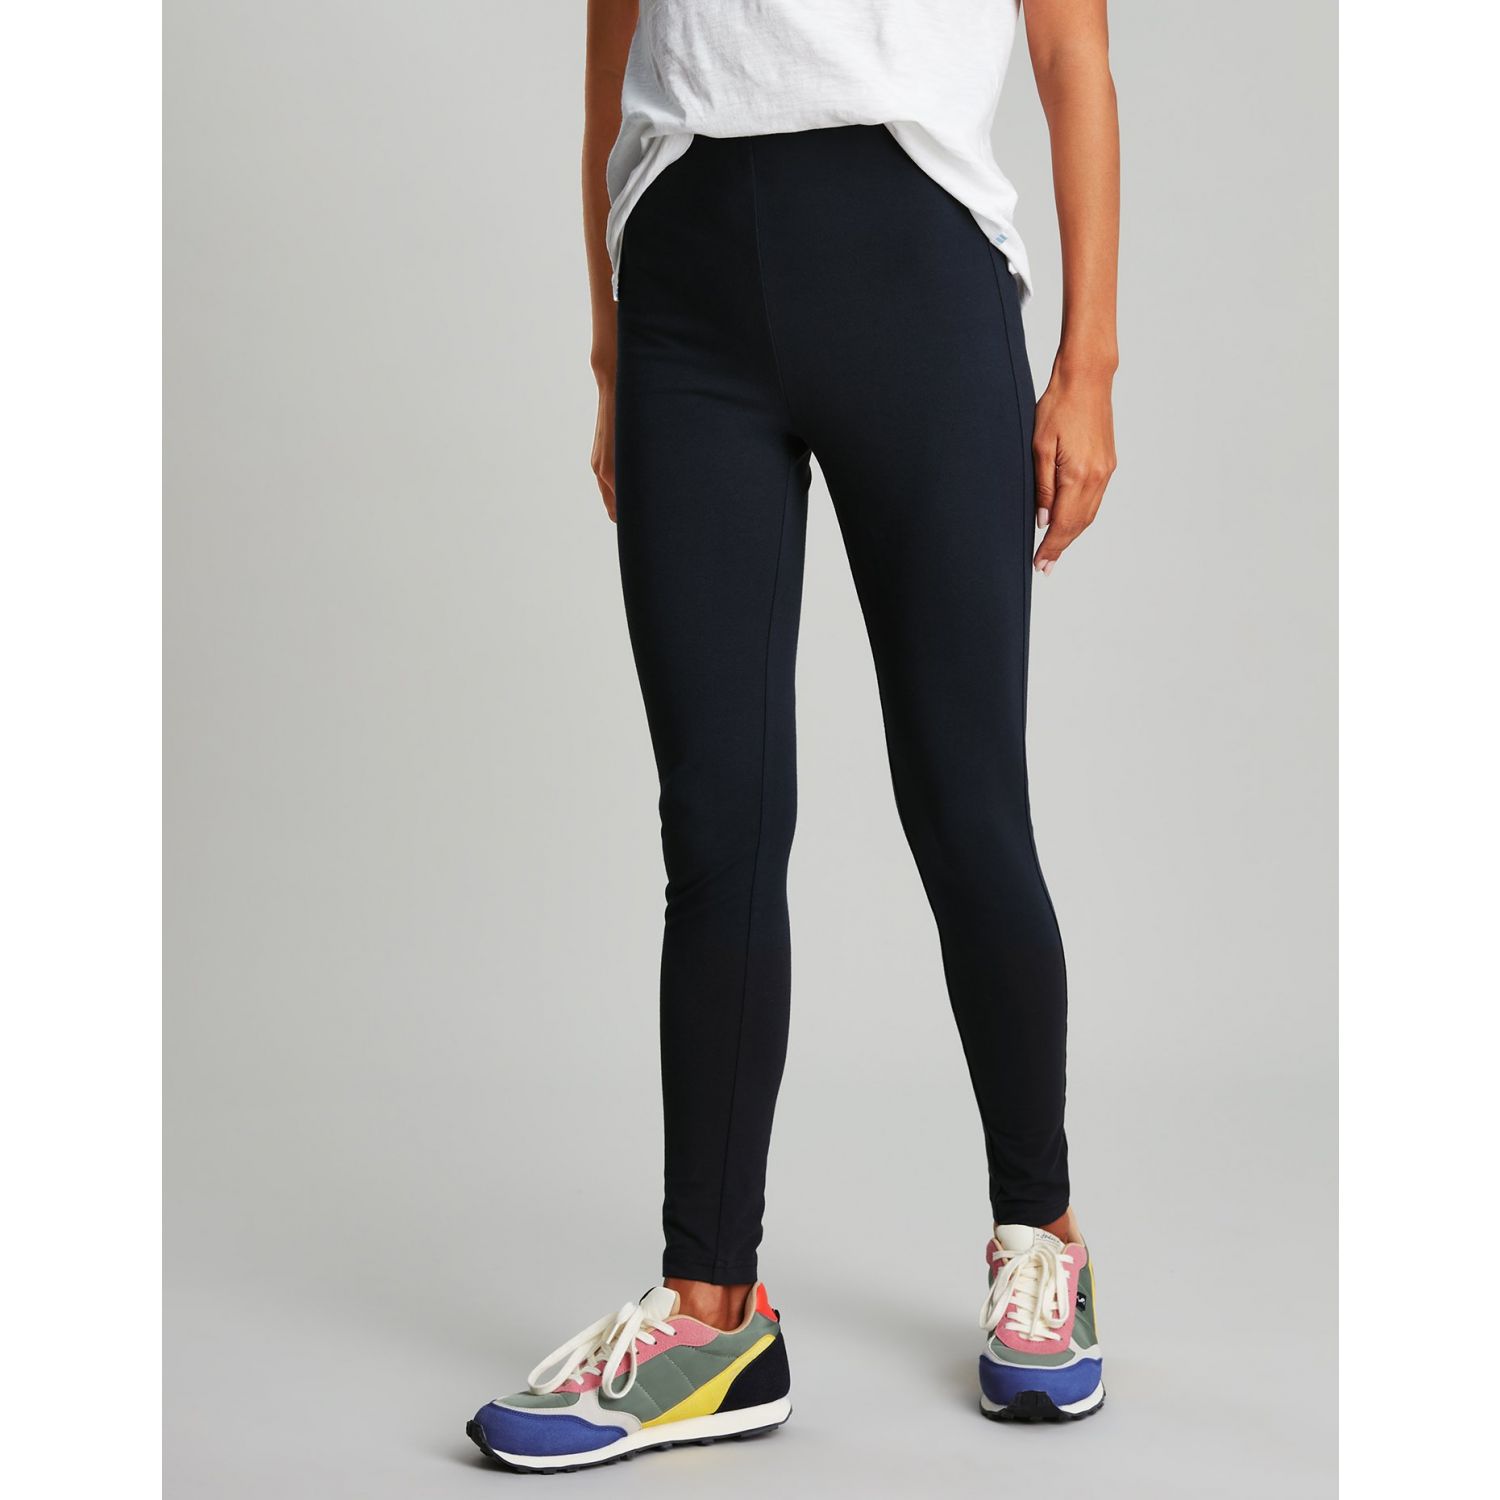 Buy Joules Ebba Black Plain Leggings from the Joules online shop